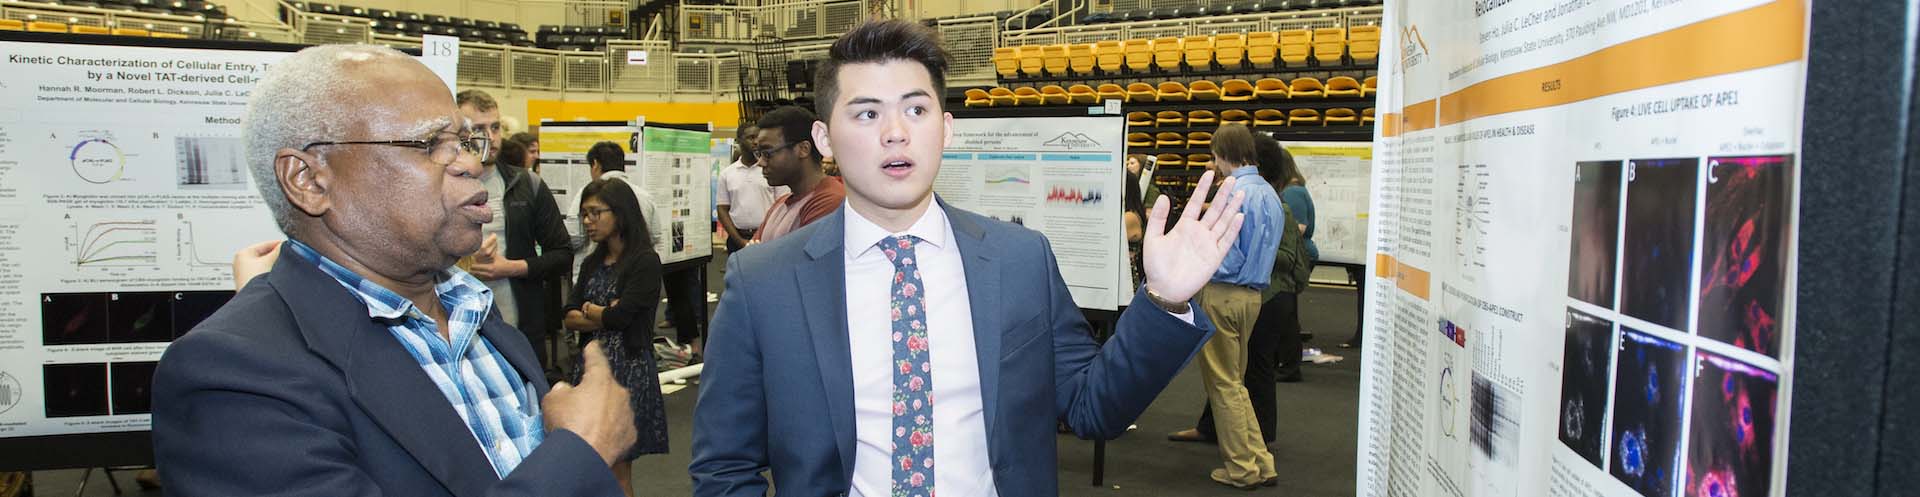 Kennesaw State Undergraduate Research